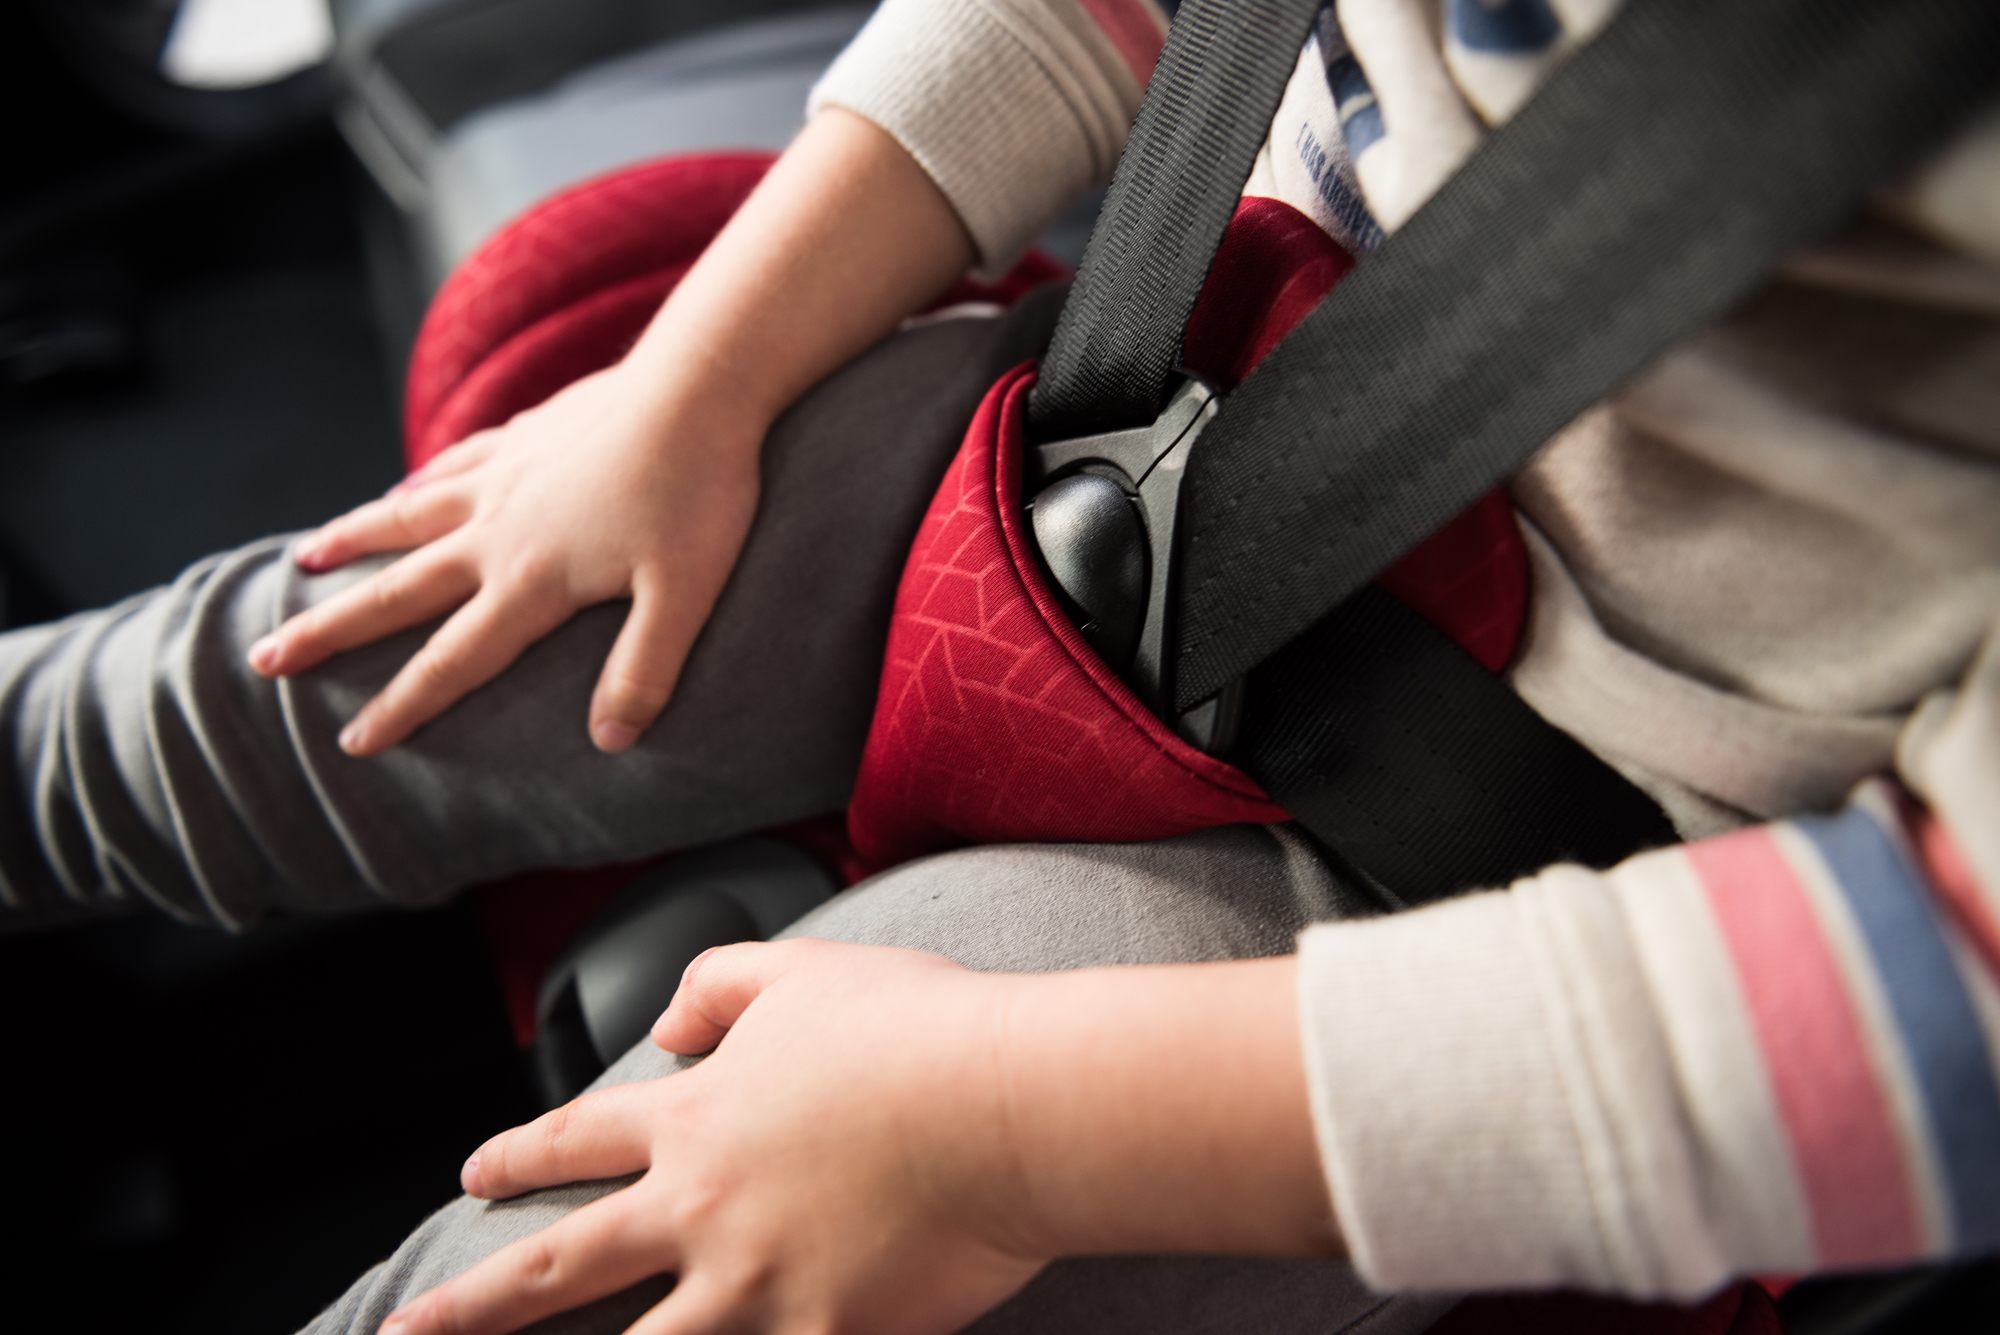 Popular Car Booster Seats for Kids Found Unsafe